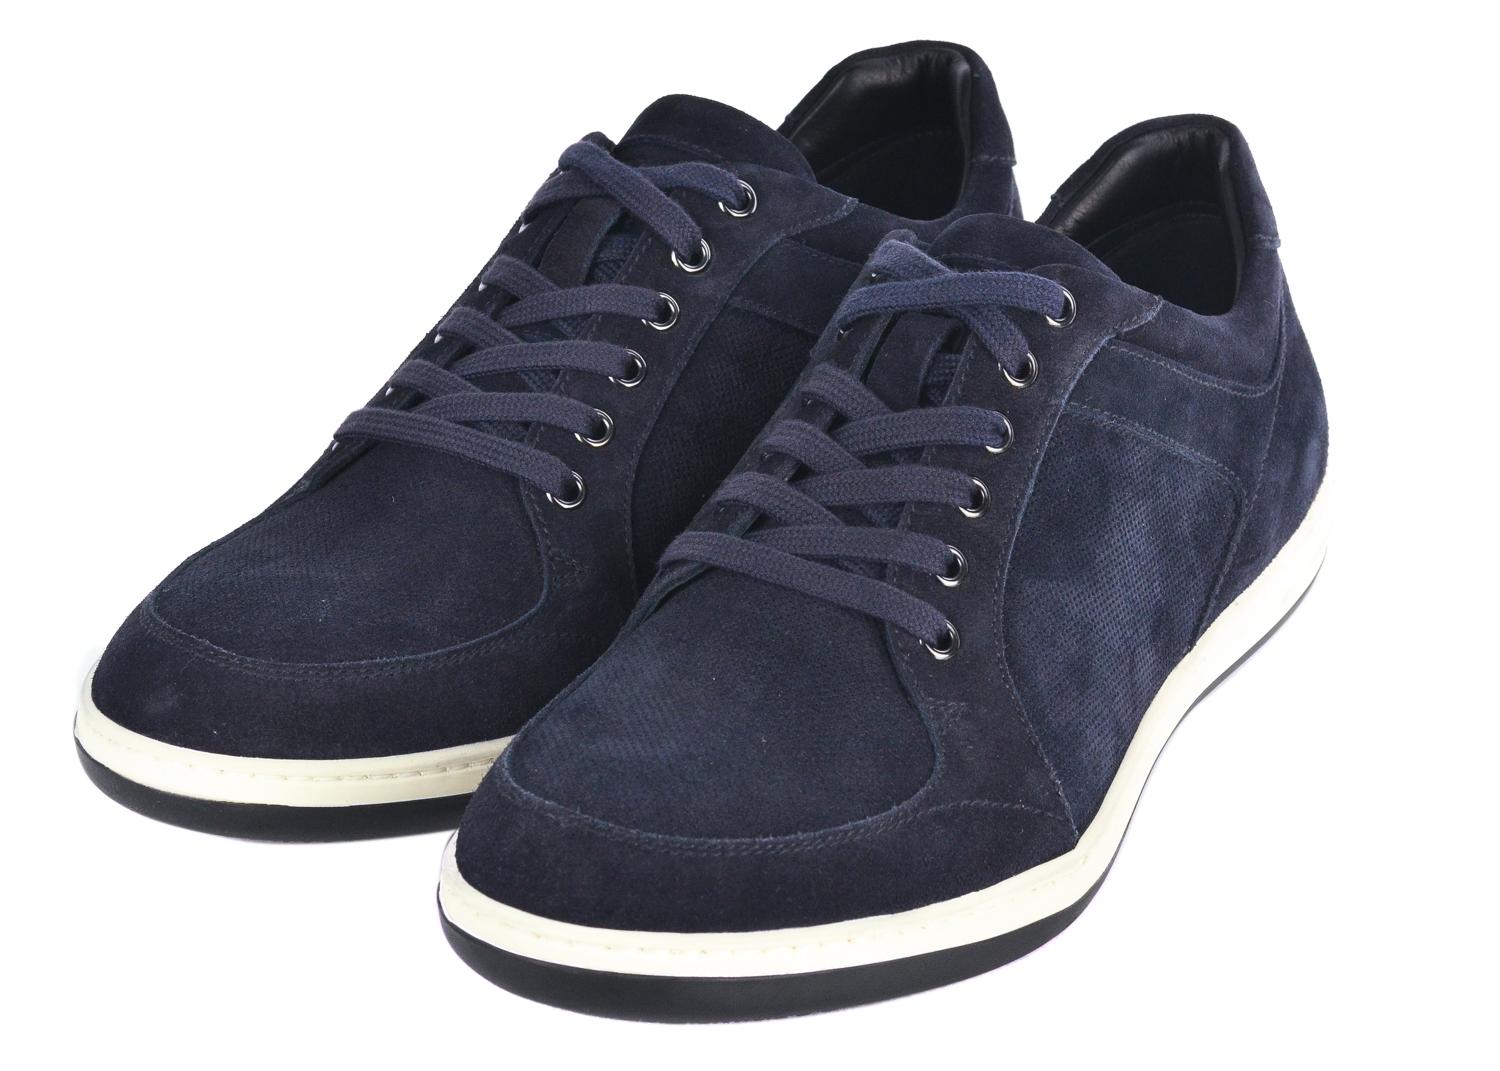 Sport your modern refined street style pair when in Giorgio Armani. These navy blue sneakers feature tonal blue laces, a thick white rubber sole, and a sleek leather black insole providing the calm edge you need. This sneaker can be paired with